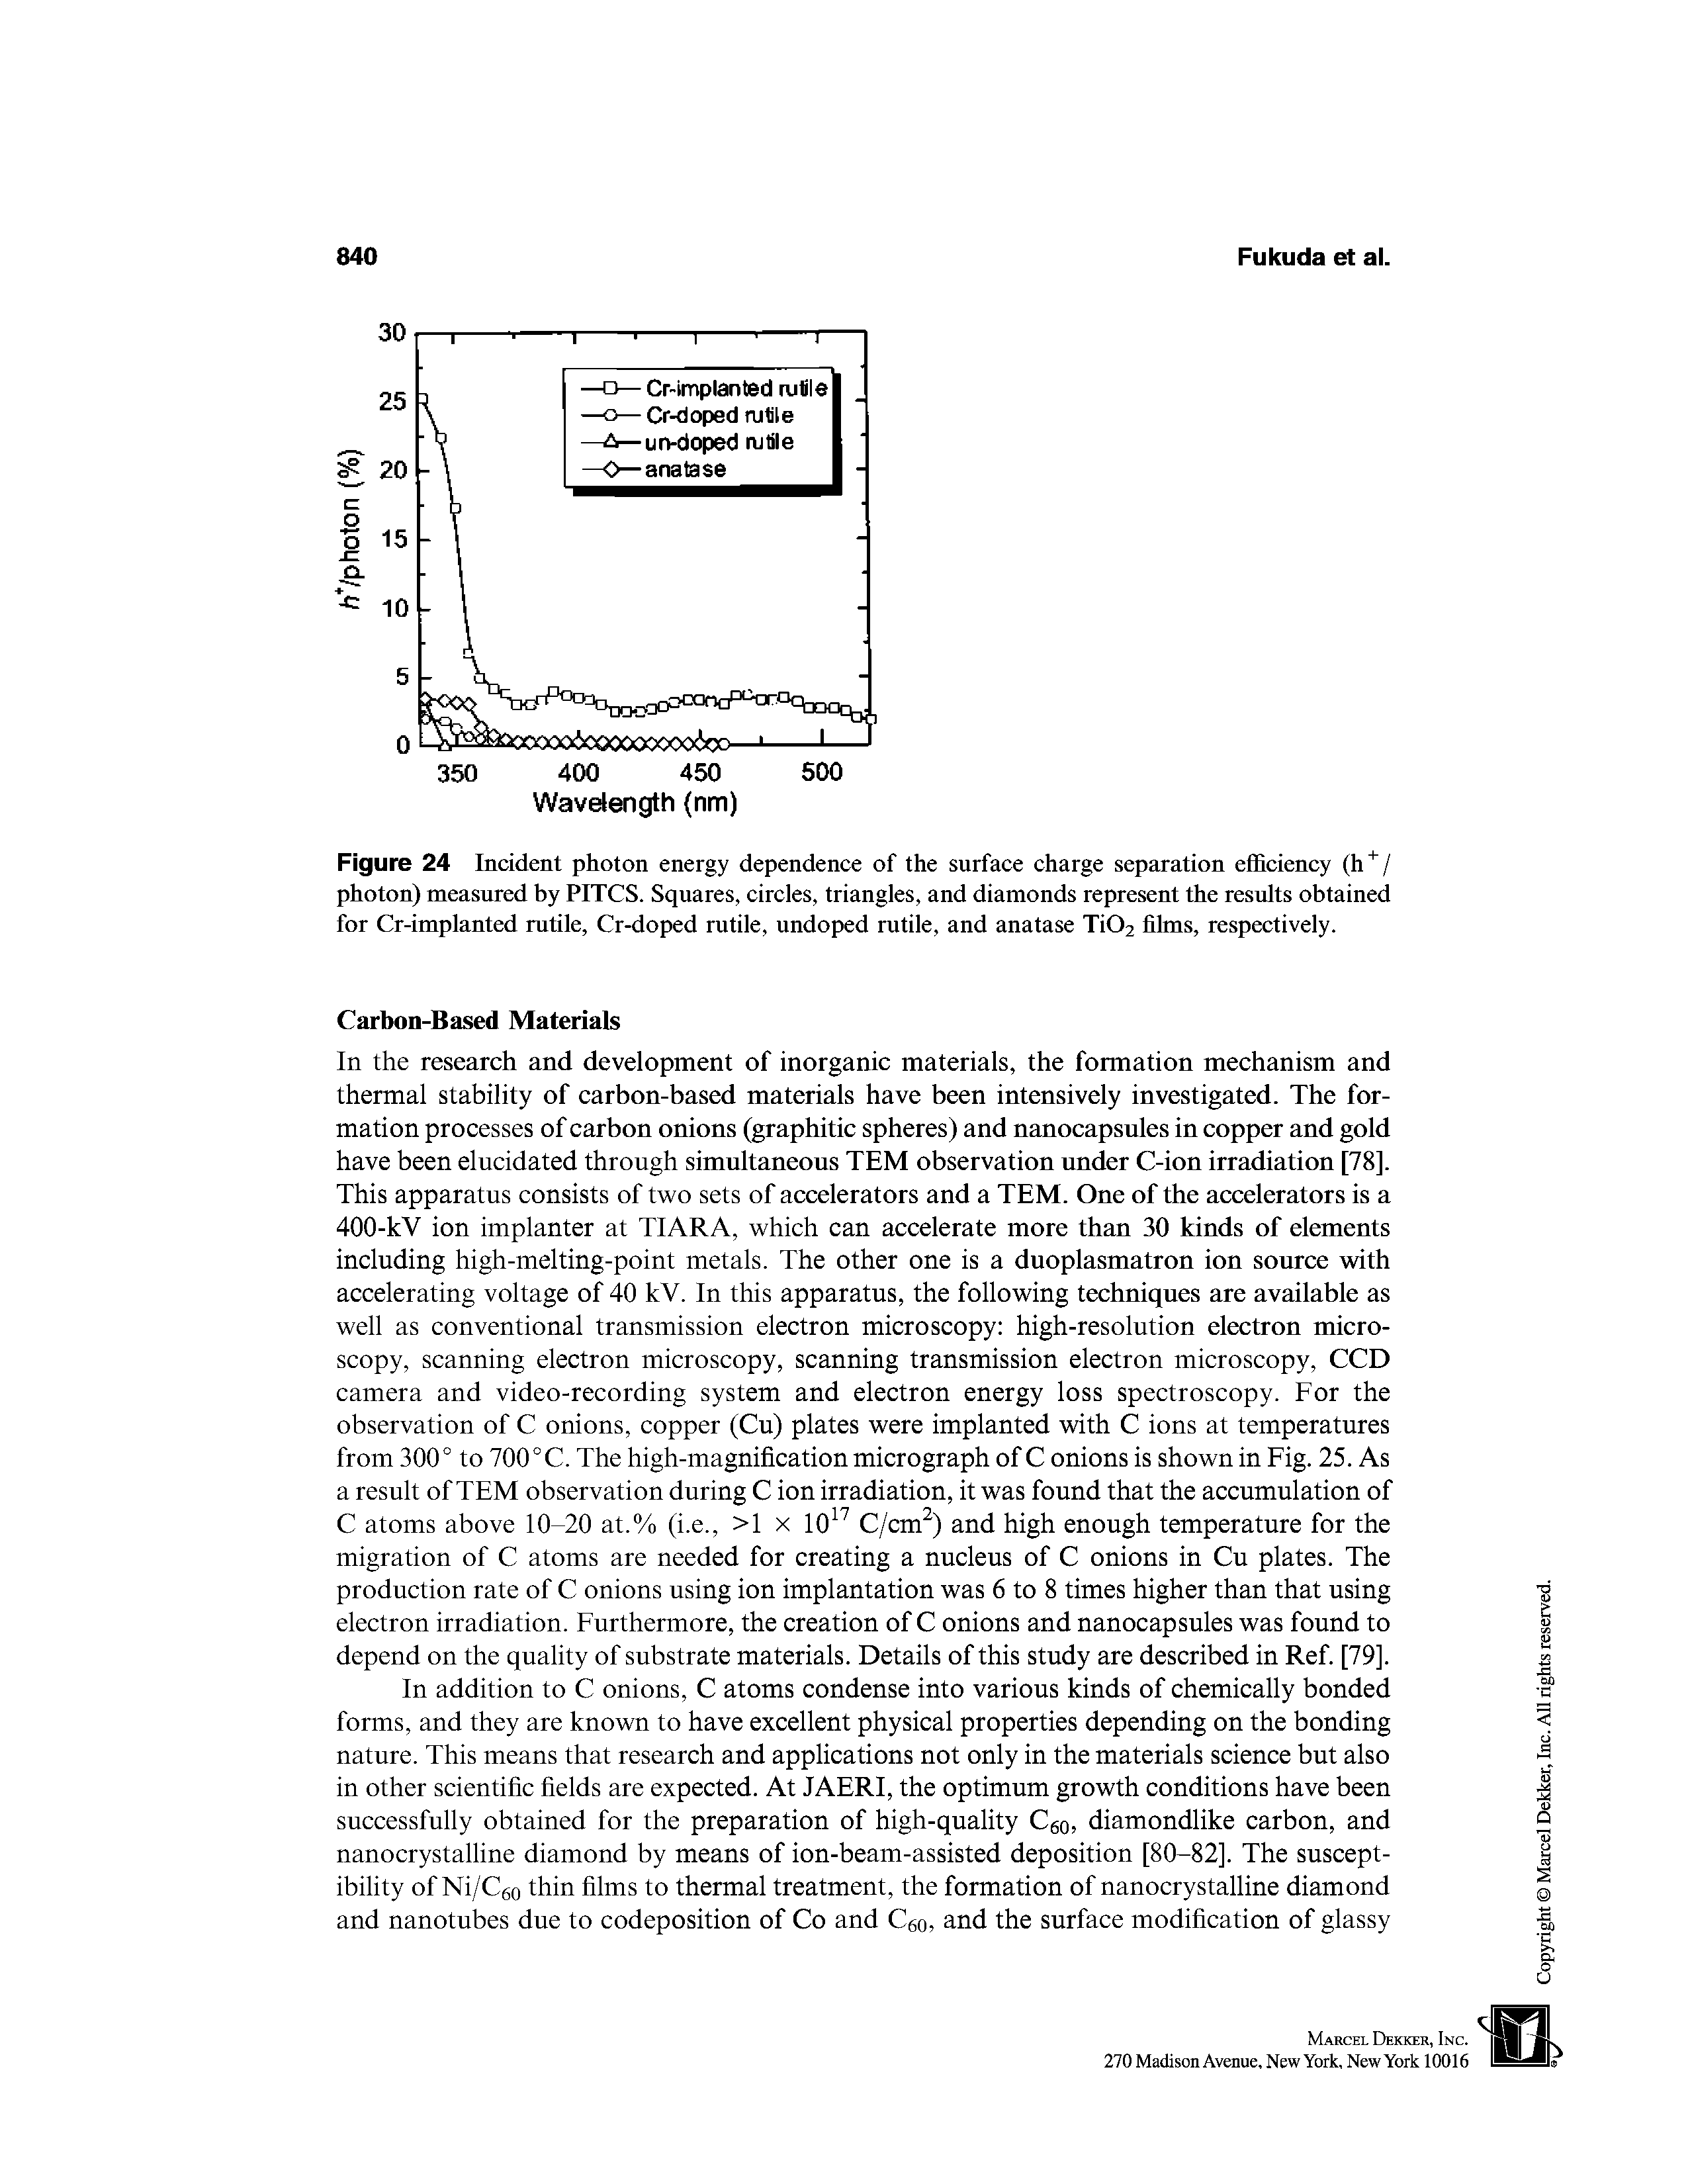 Figure 24 Incident photon energy dependence of the surface charge separation efficiency (h" / photon) measured by PITCS. Squares, circles, triangles, and diamonds represent the results obtained for Cr-implanted rutile, Cr-doped rutile, undoped rutile, and anatase Ti02 films, respectively.